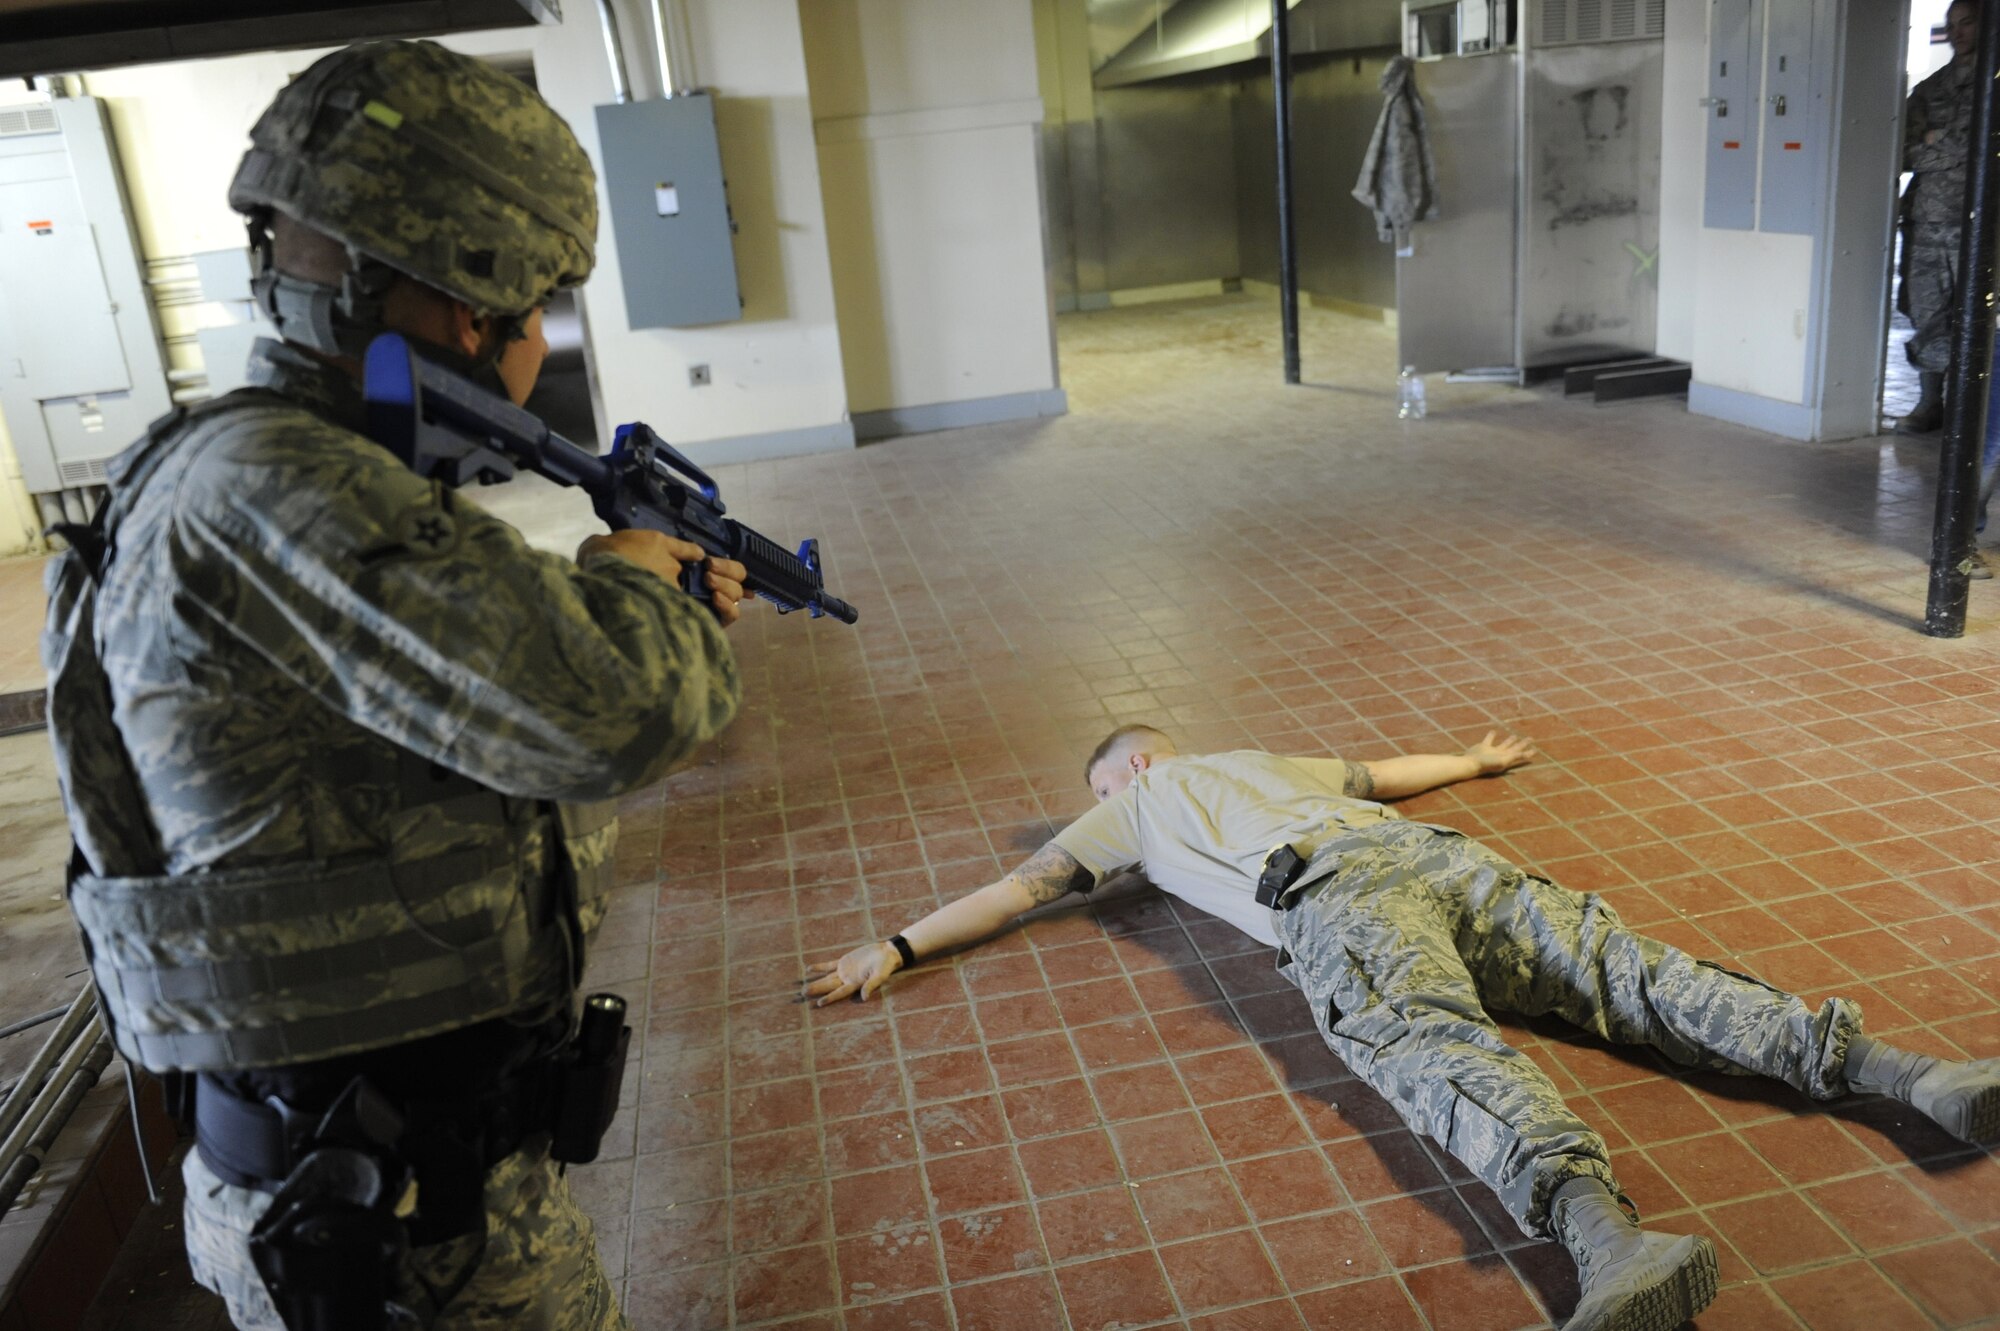 An Airman assigned to 99th Security Forces Squadron apprehends a simulated active-shooter during a training simulation in Area II on Nellis Air Force Base, Nev., May 17, 2017. The squadron is responsible for ensuring the safety of all base weapons, property and personnel from hostile forces. (U.S. Air Force photo by Senior Airman Kevin Tanenbaum/Released)